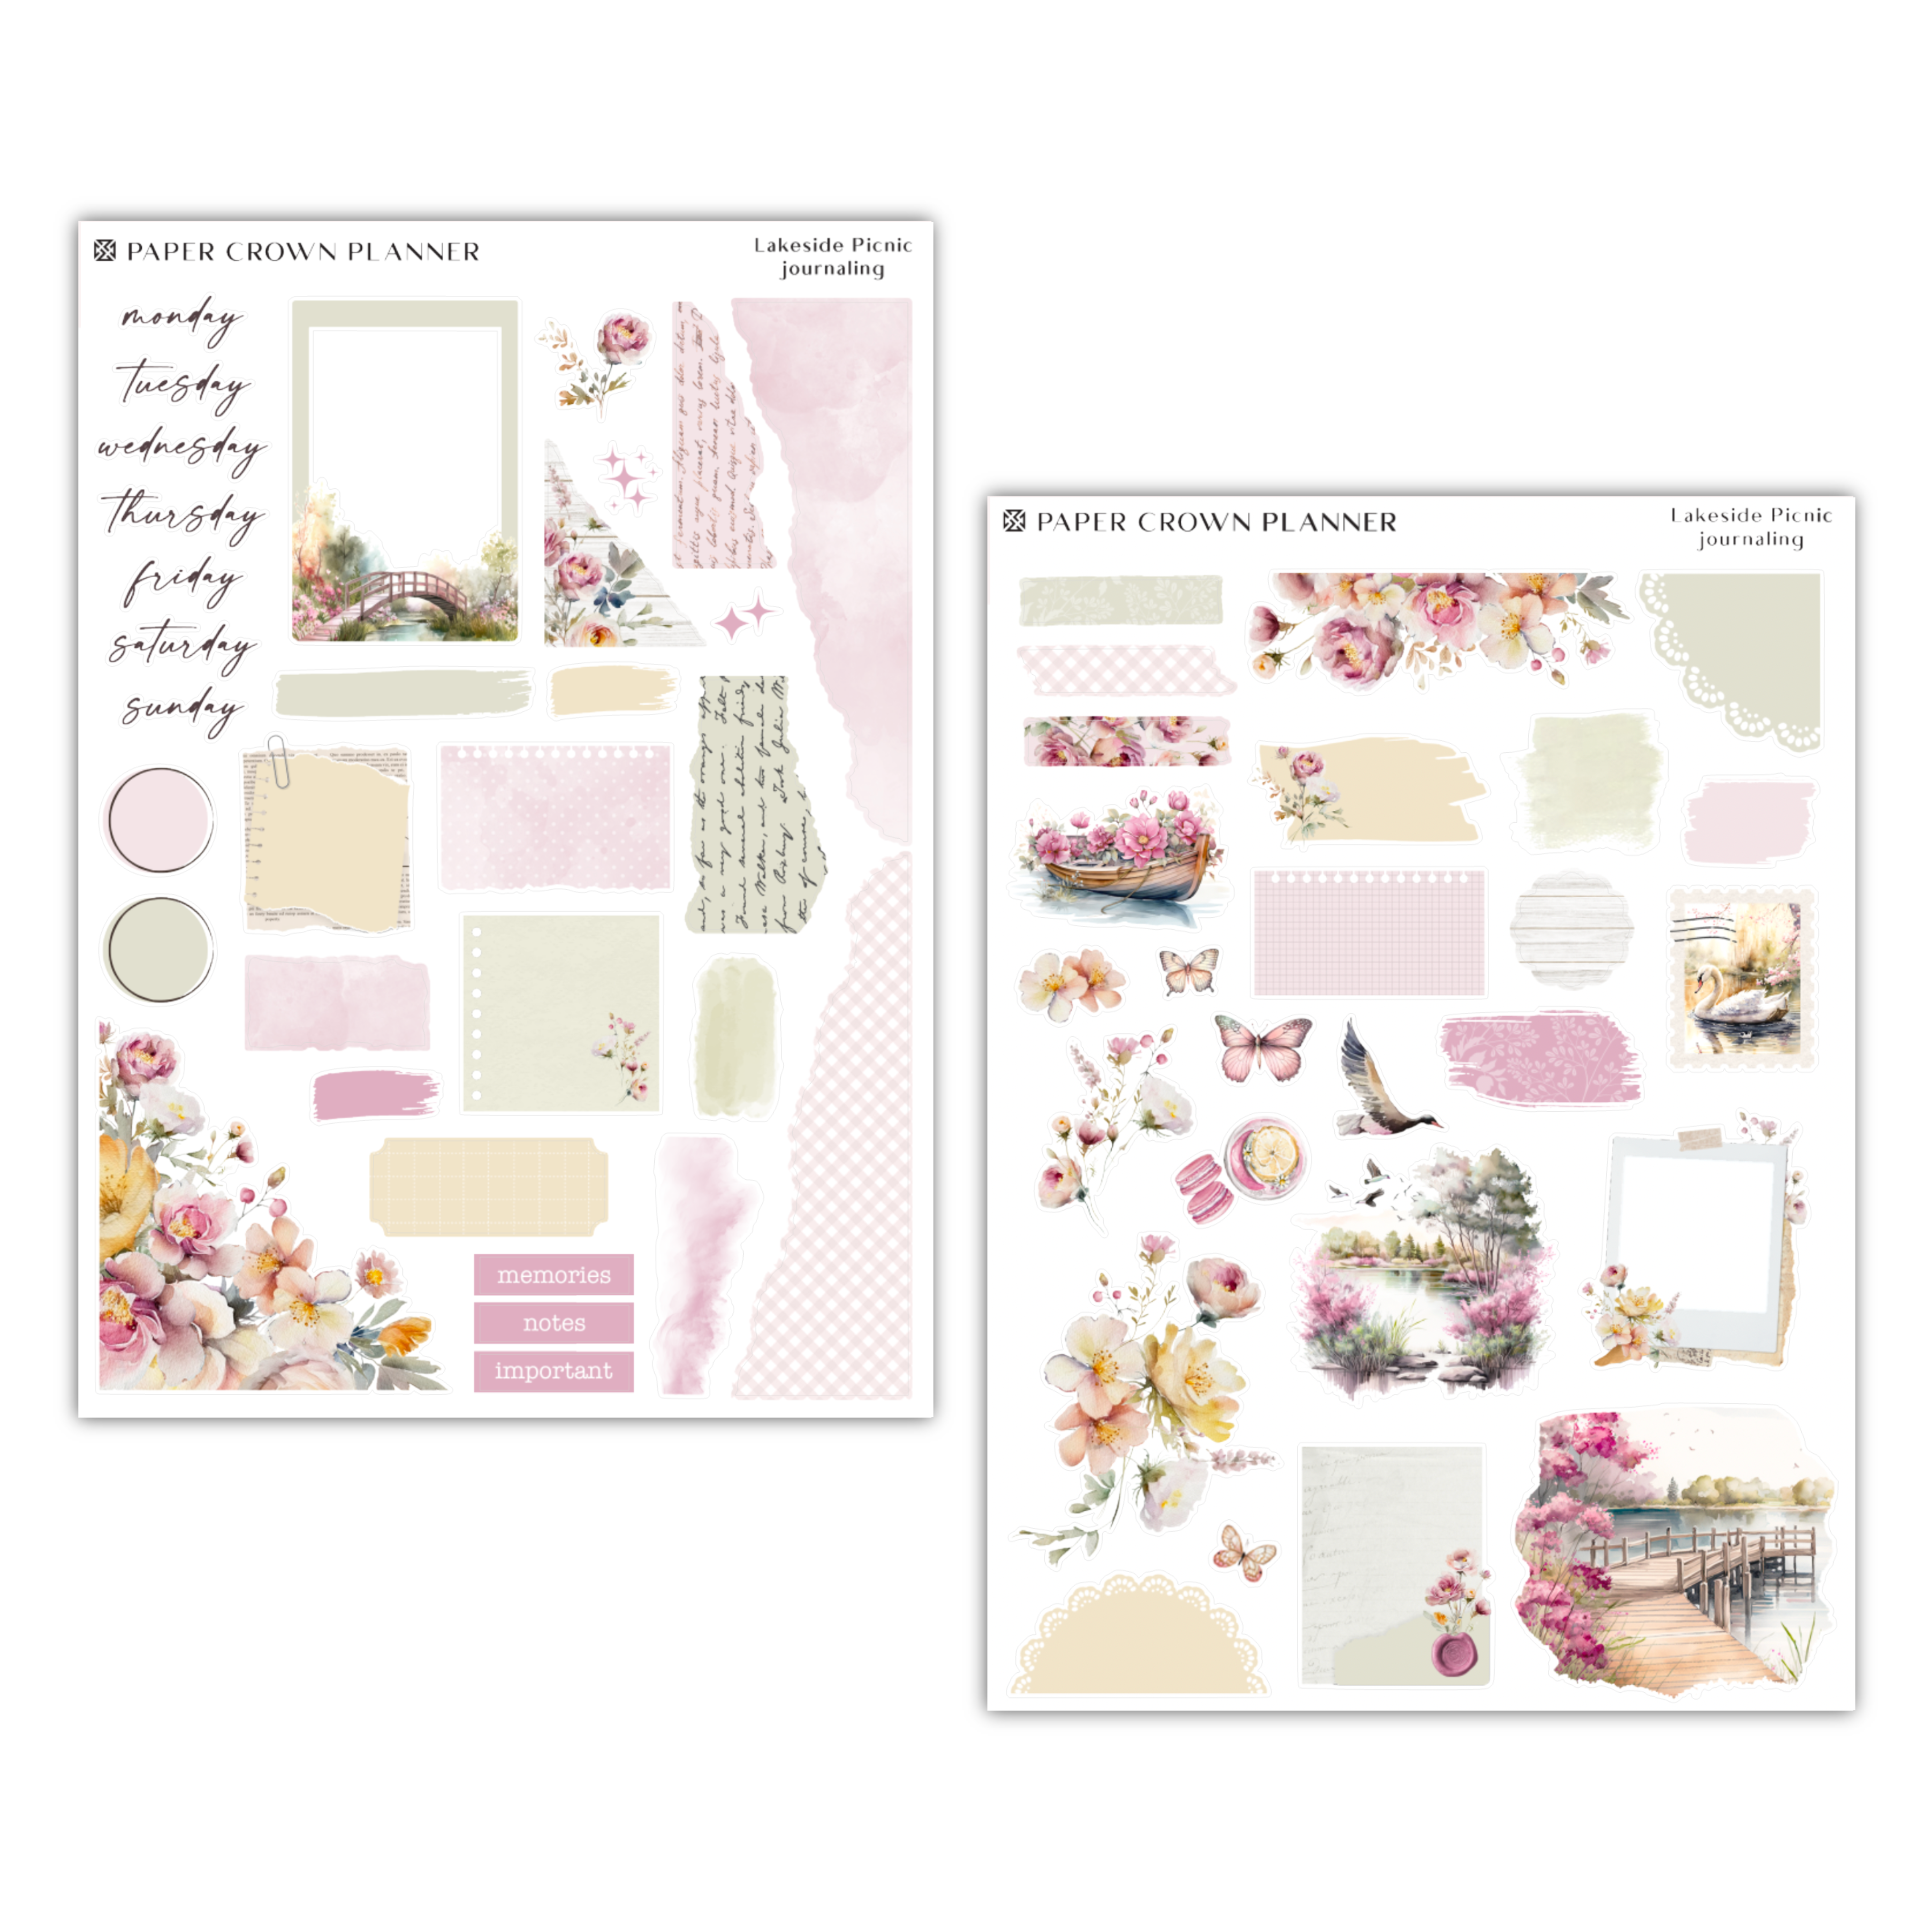 a pink and yellow planner sticker and a pink and white planner sticker